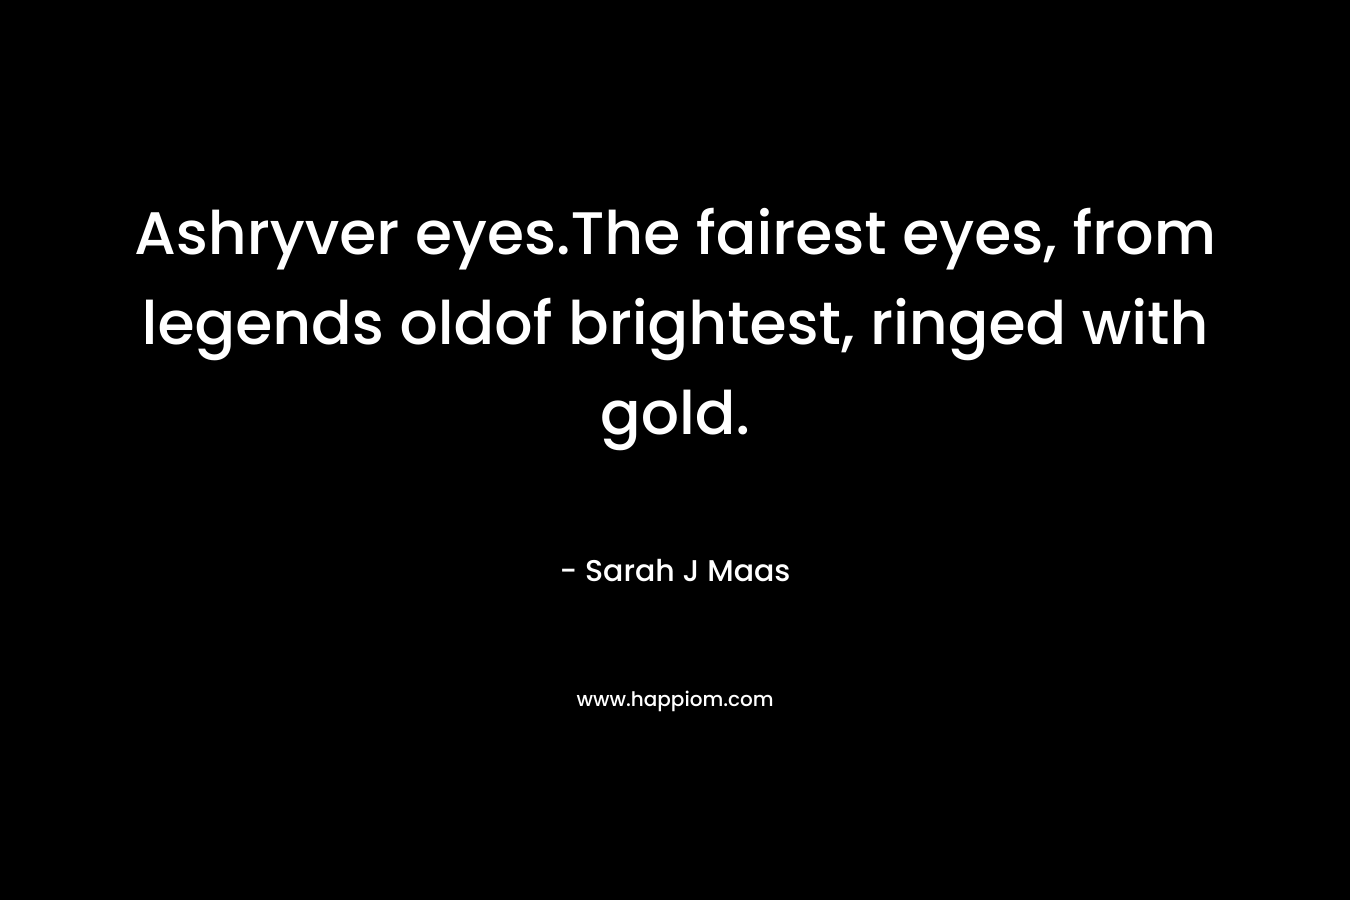 Ashryver eyes.The fairest eyes, from legends oldof brightest, ringed with gold. – Sarah J Maas